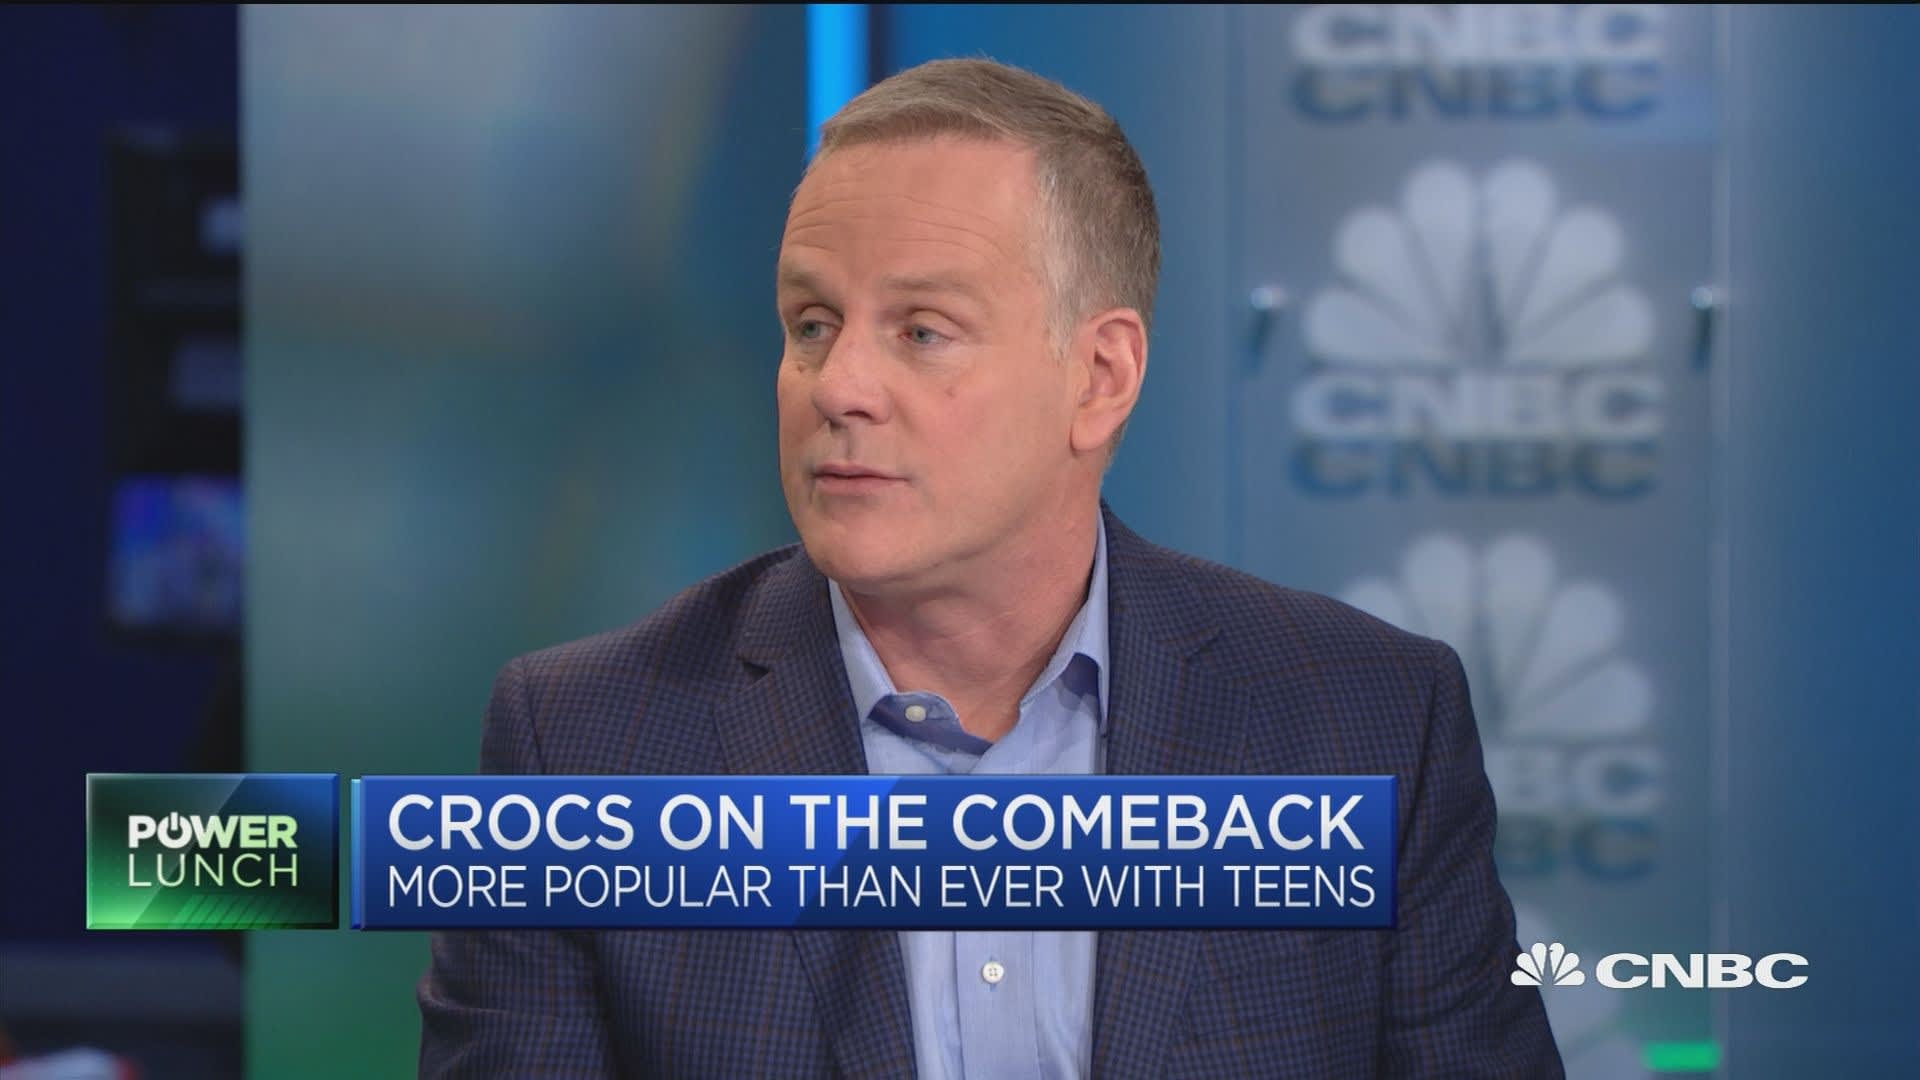 Crocs' Andrew Rees: Teen shoppers are not as 'fickle' as you think